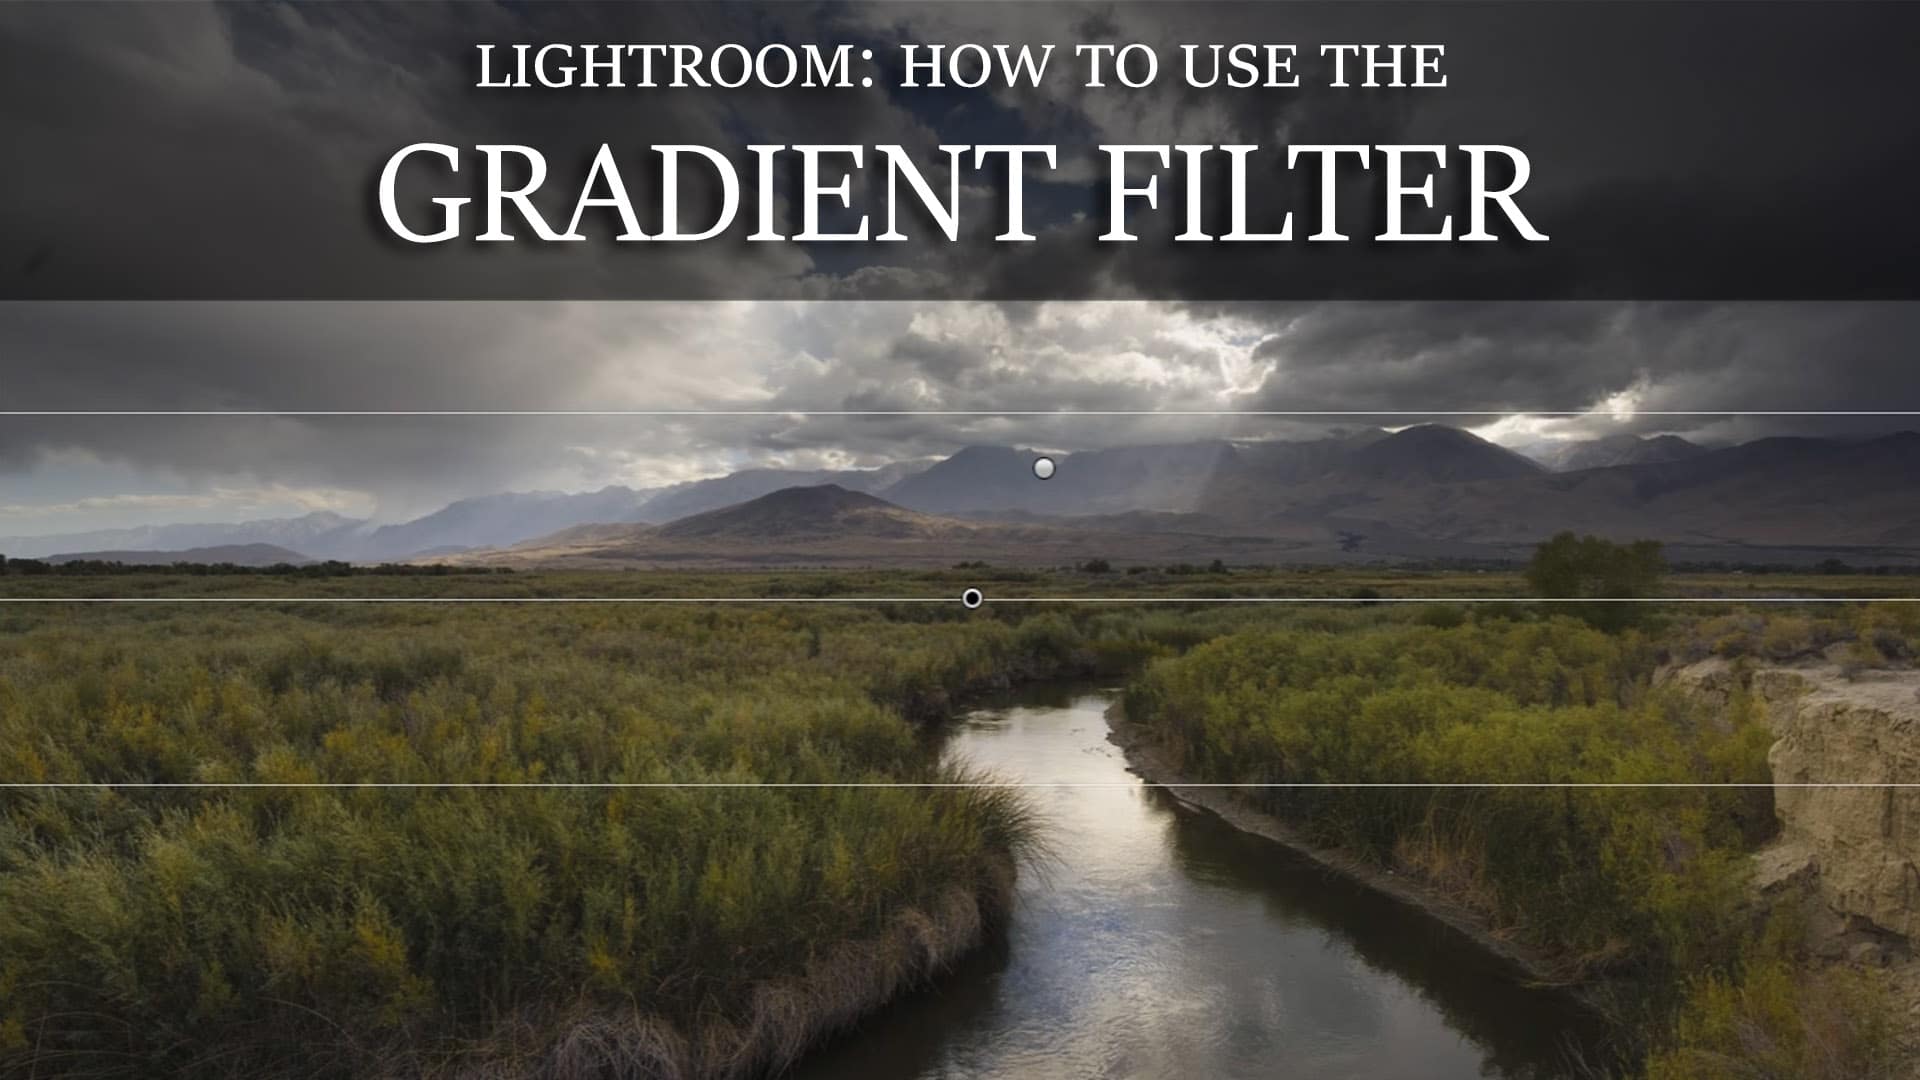 How to use a lightroom gradient filter